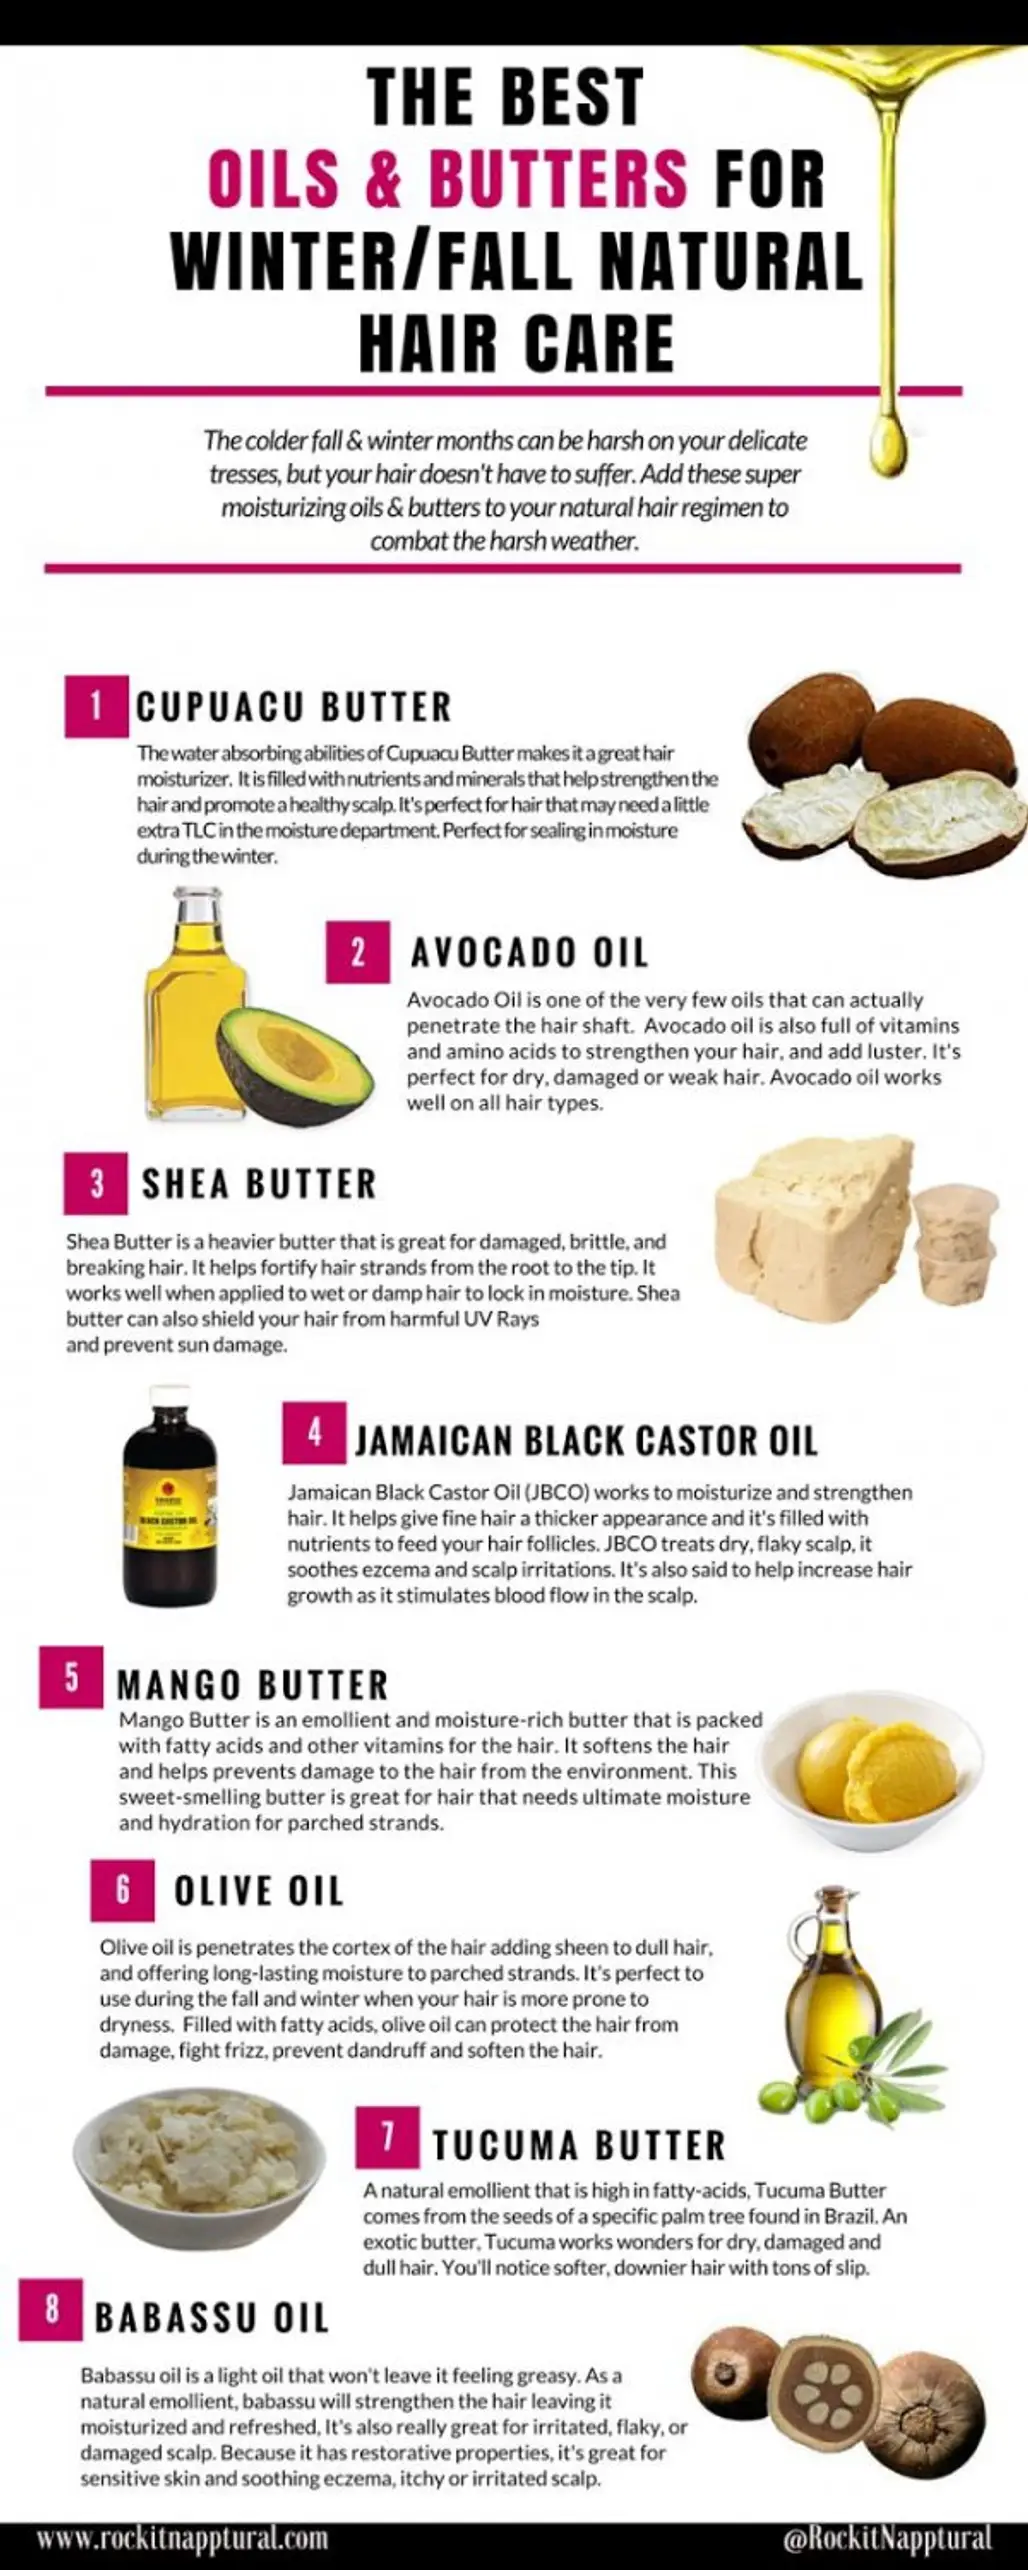 The Best Oils & Butters for Fall/Winter Hair Care